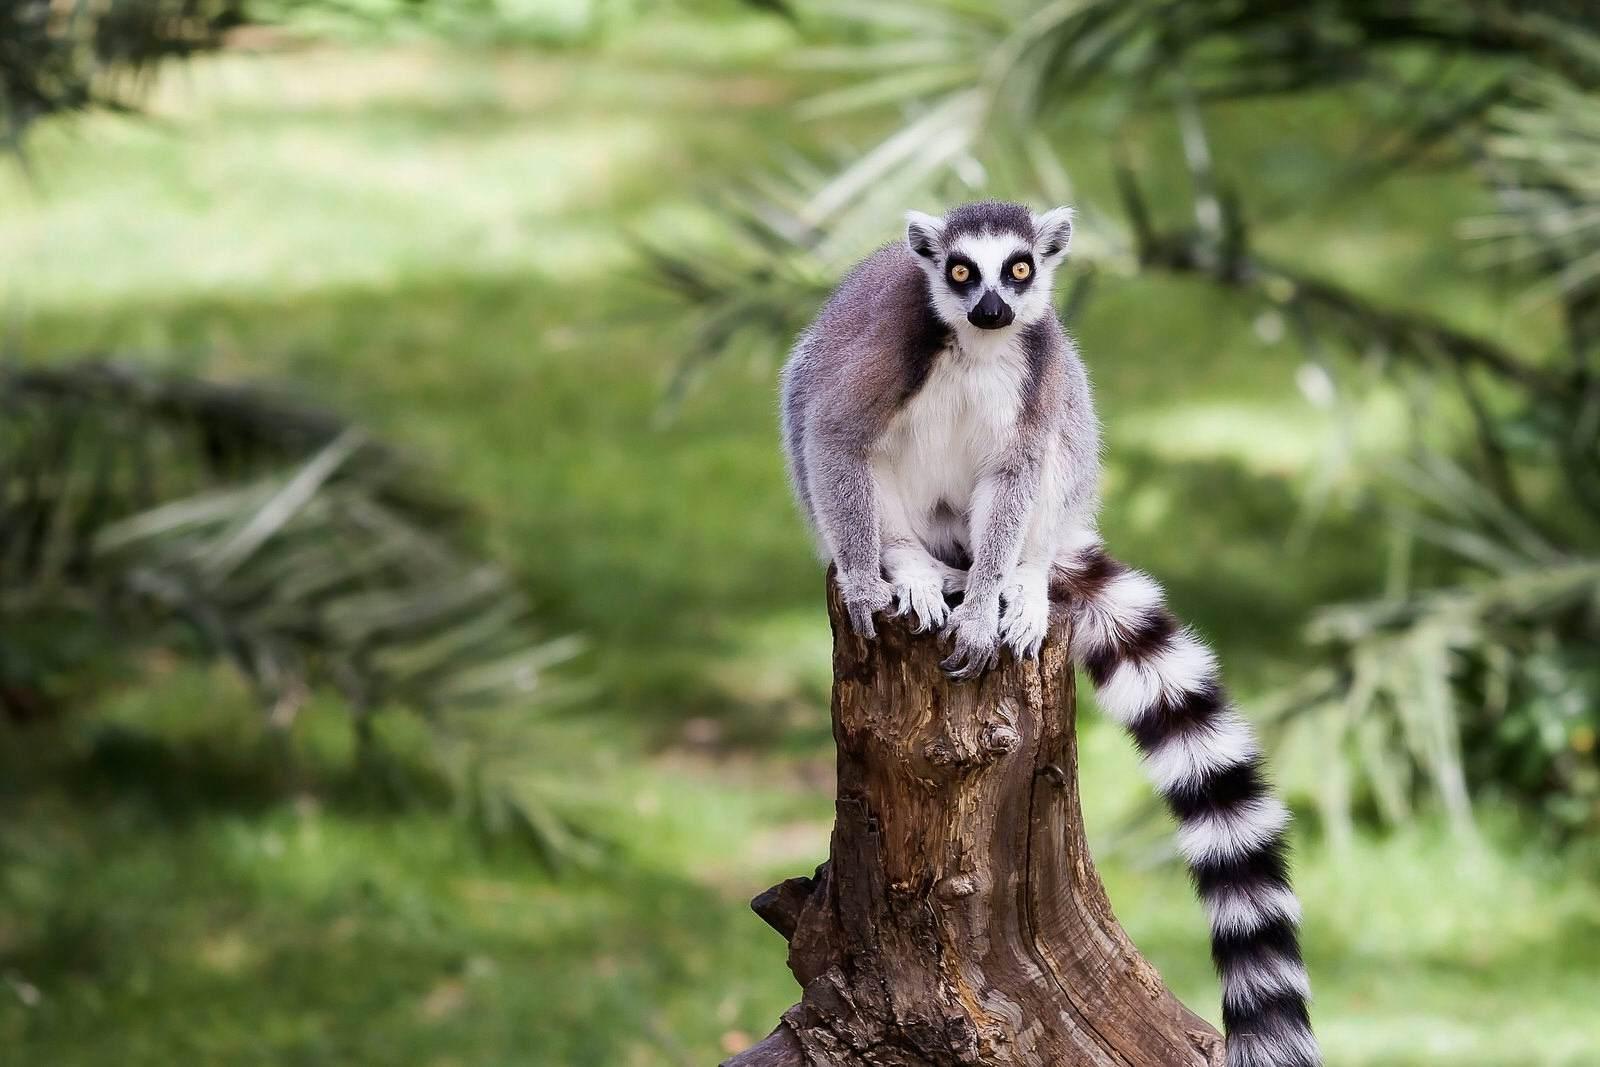 A ring tailed lemur sits atop a tree stump in Antananarivo, with greenery in the background. It has a white chest, light grey black and a striped tail of black and white. It's face is white, but there are black circles around its yellow eyes and its mouth © Gennaro Leonardi / EyeEm / Getty Images